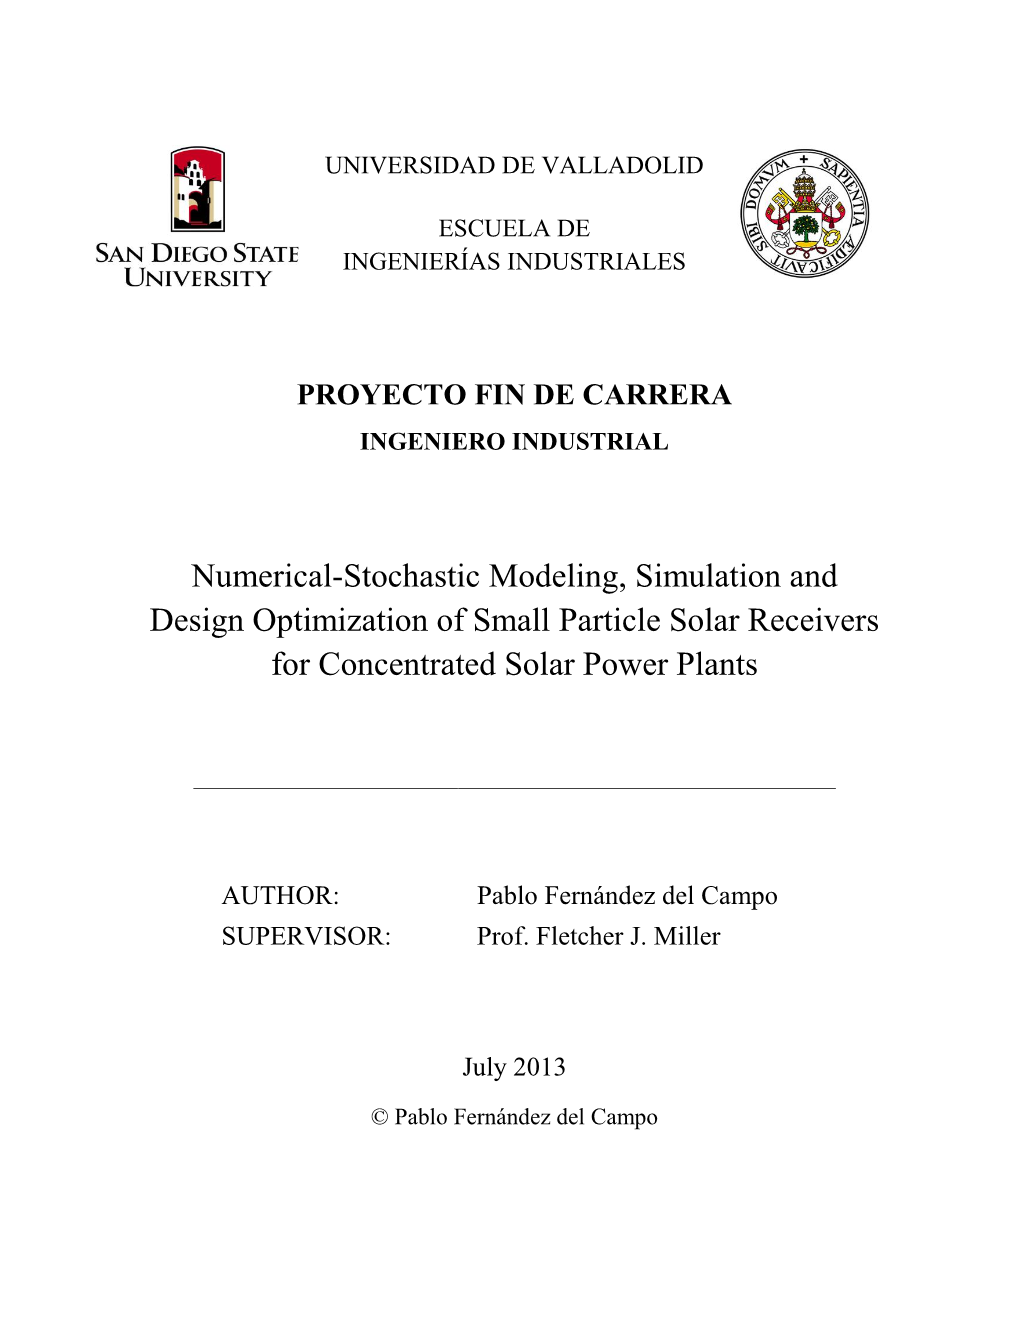 Numerical-Stochastic Modeling, Simulation and Design Optimization of Small Particle Solar Receivers for Concentrated Solar Power Plants